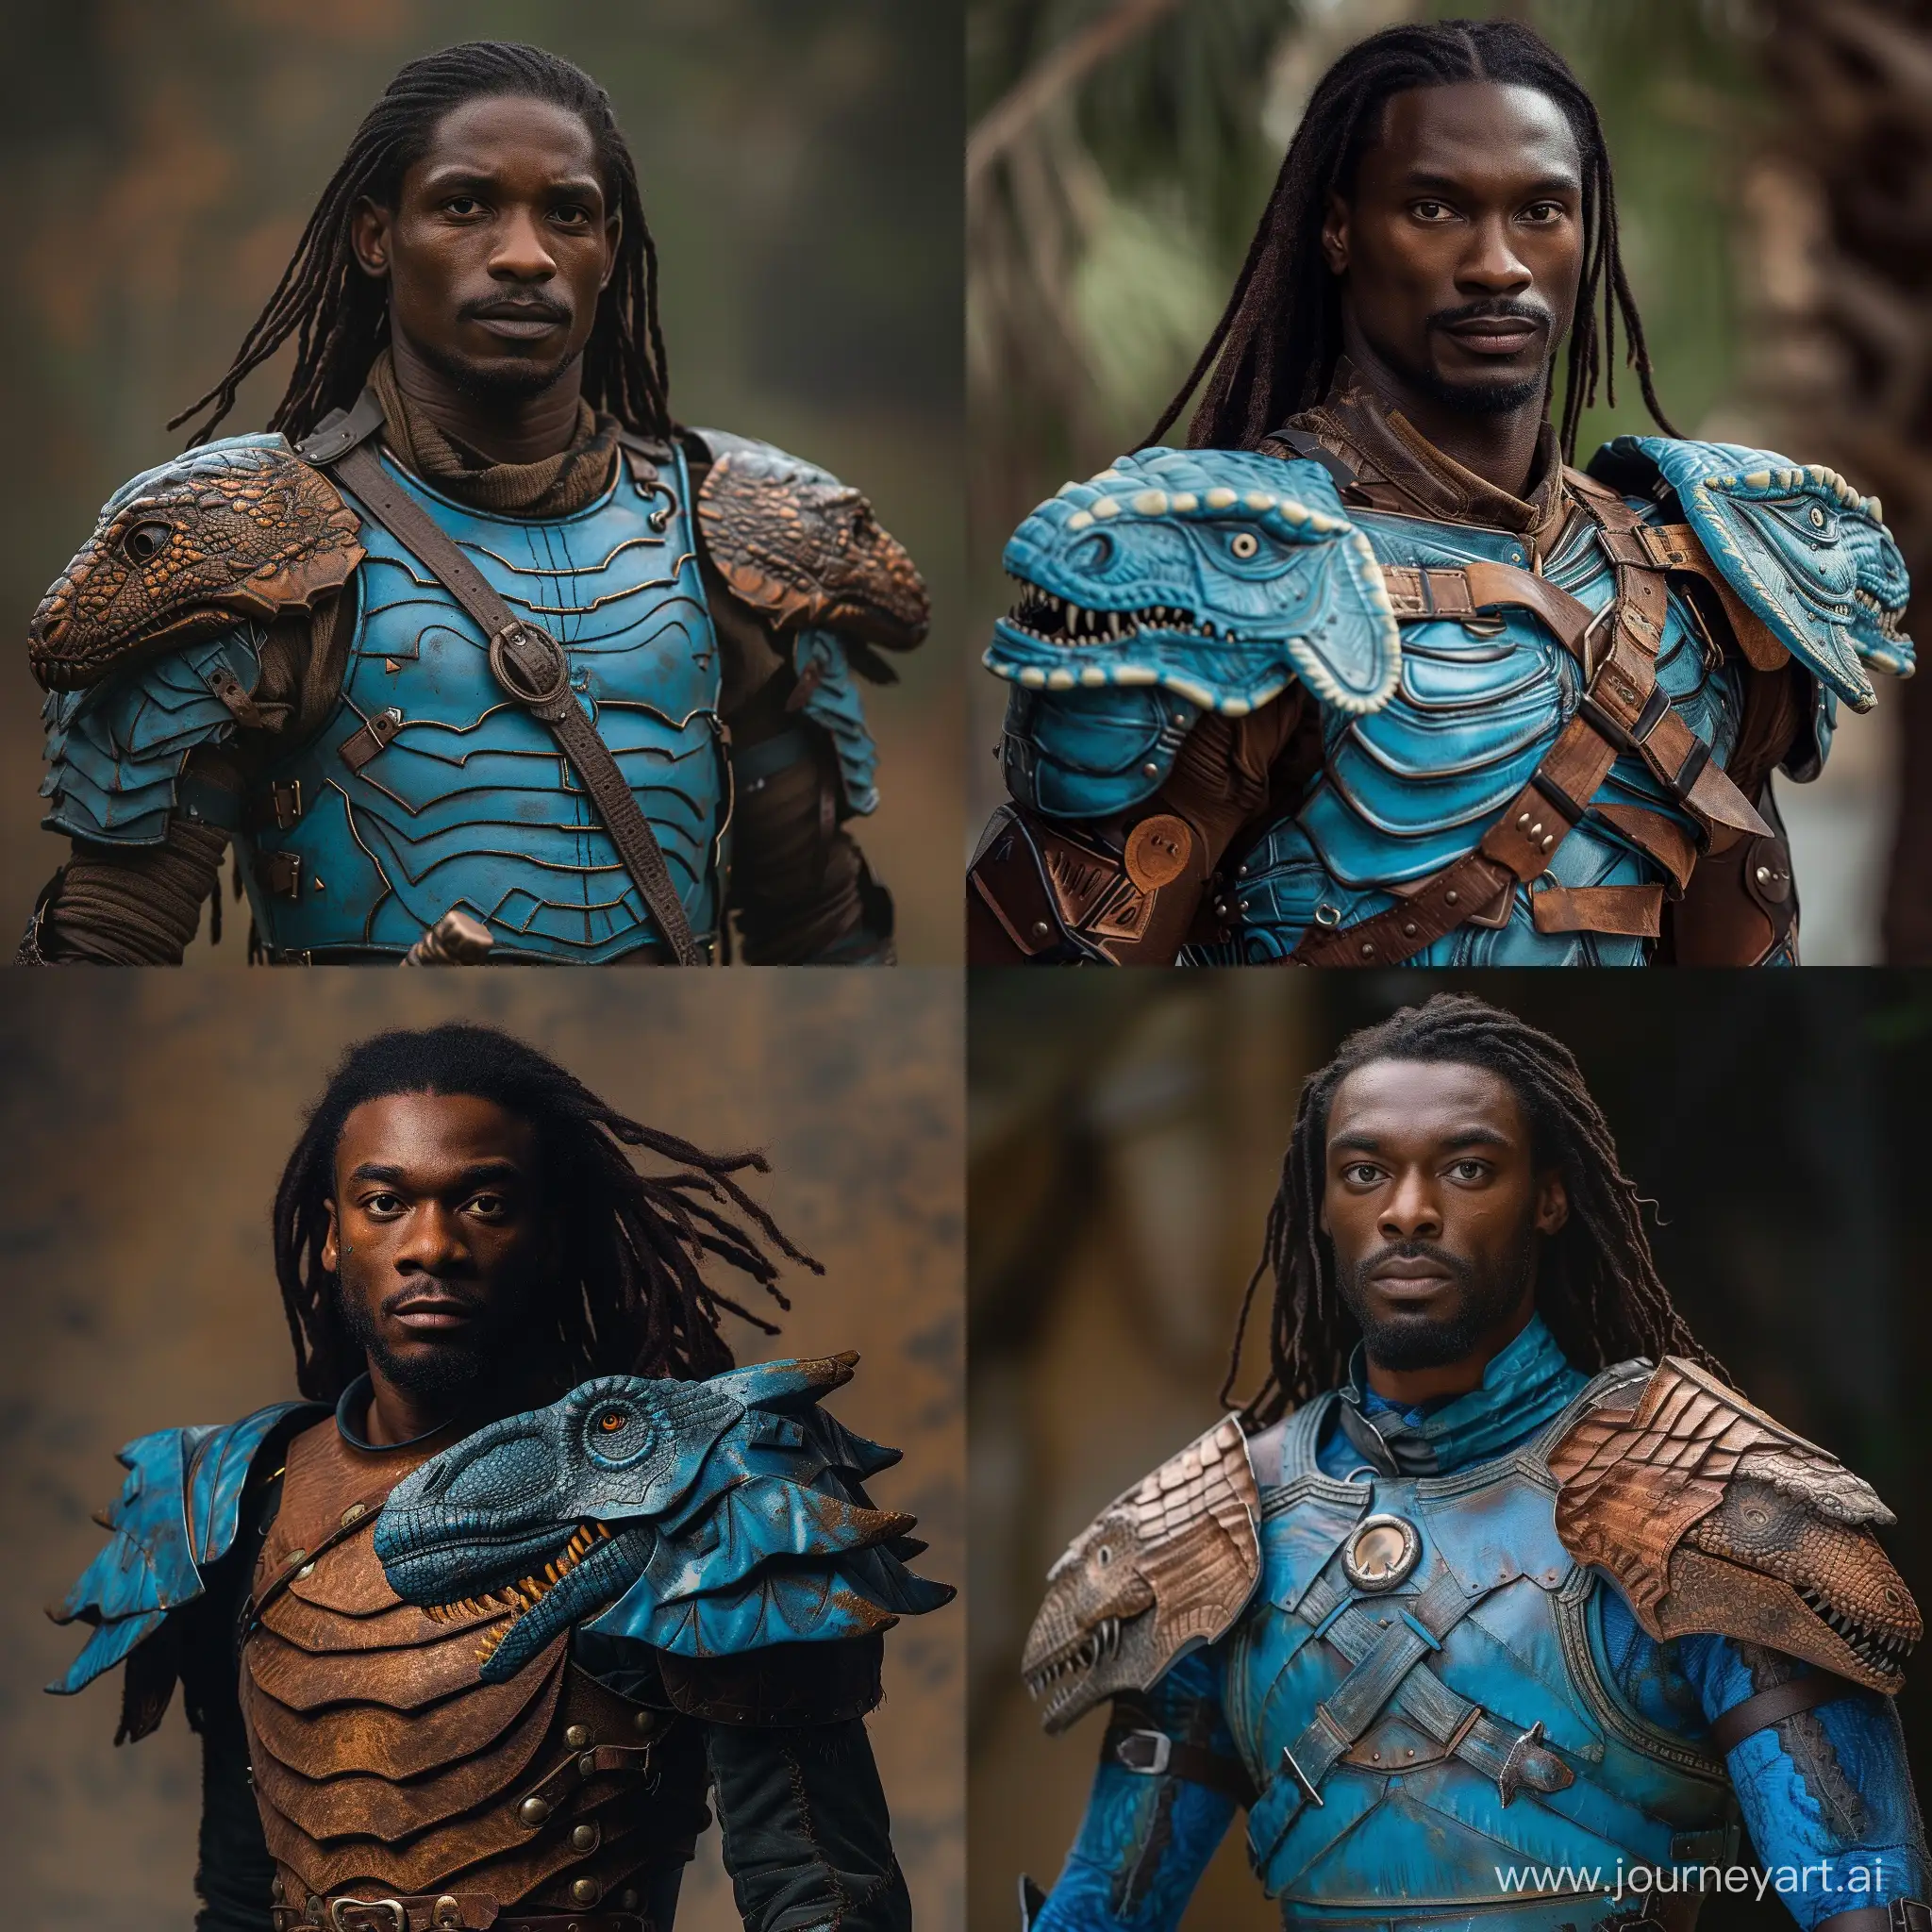 VelociraptorInspired-Armor-AfricanAmerican-Man-with-Long-Hair-in-BlueBrown-Armor